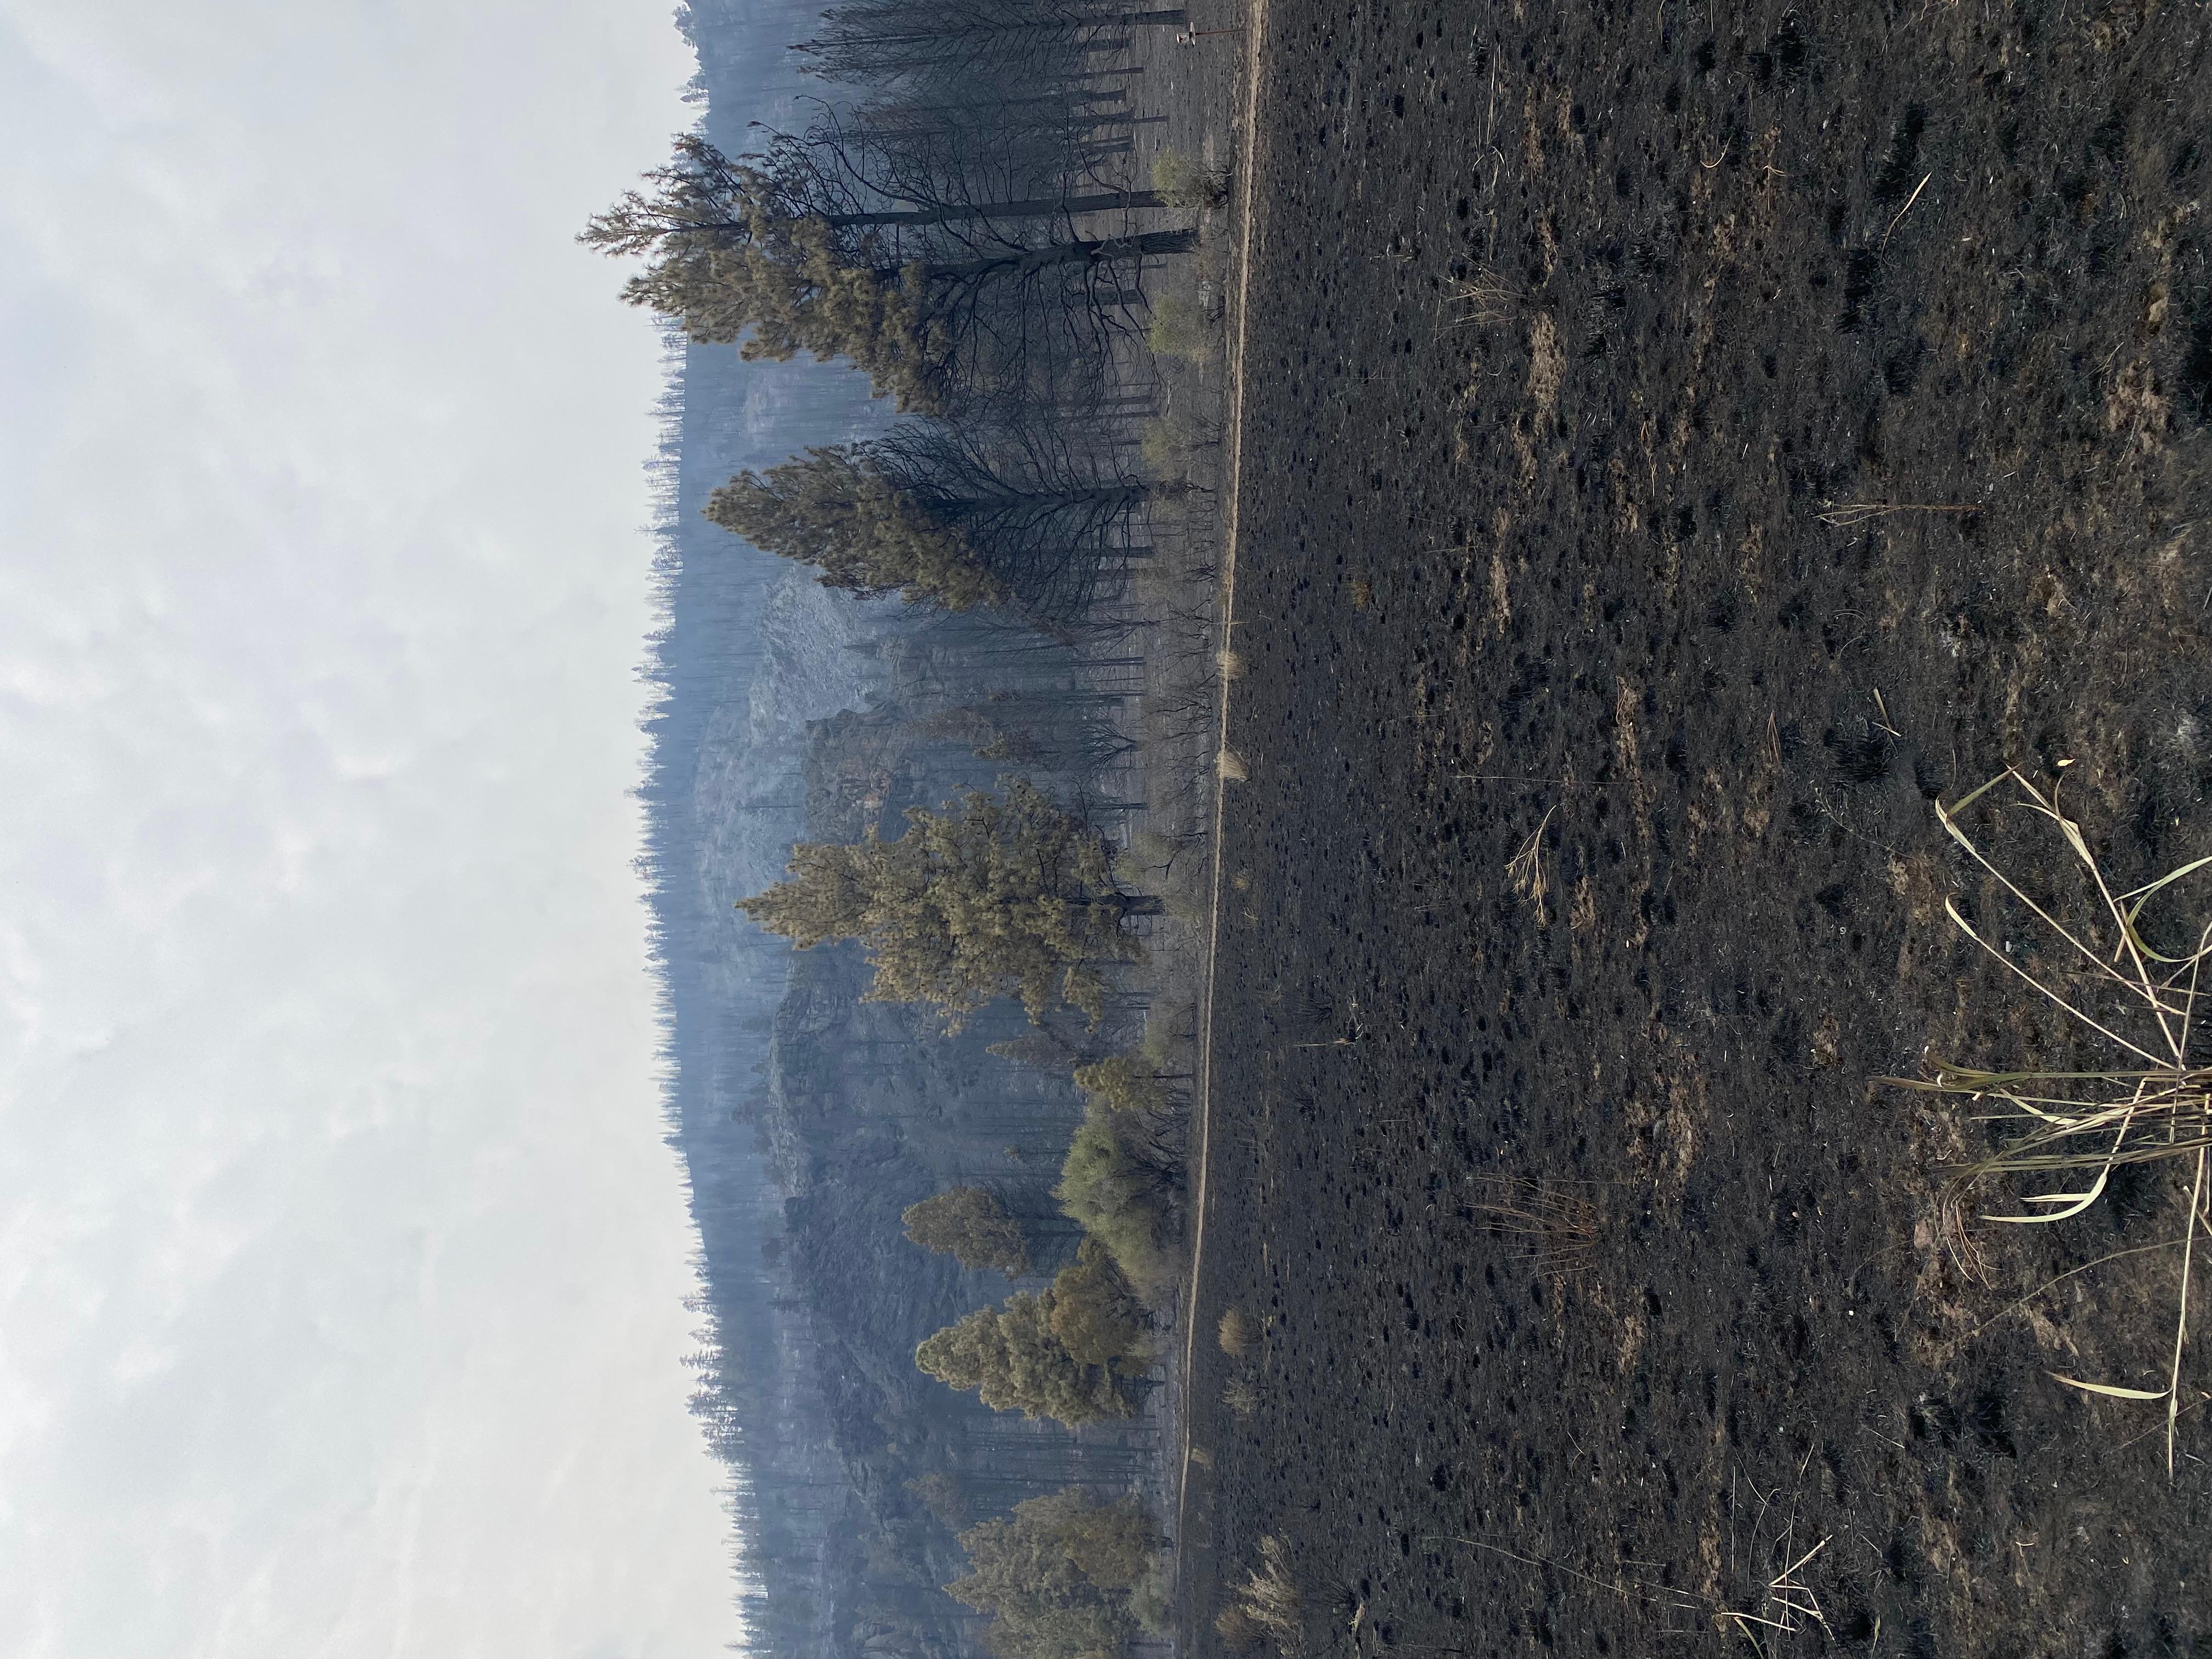 Photo taken on Sept. 11, 2022. This is in the northern area of the fire off of Webber Road